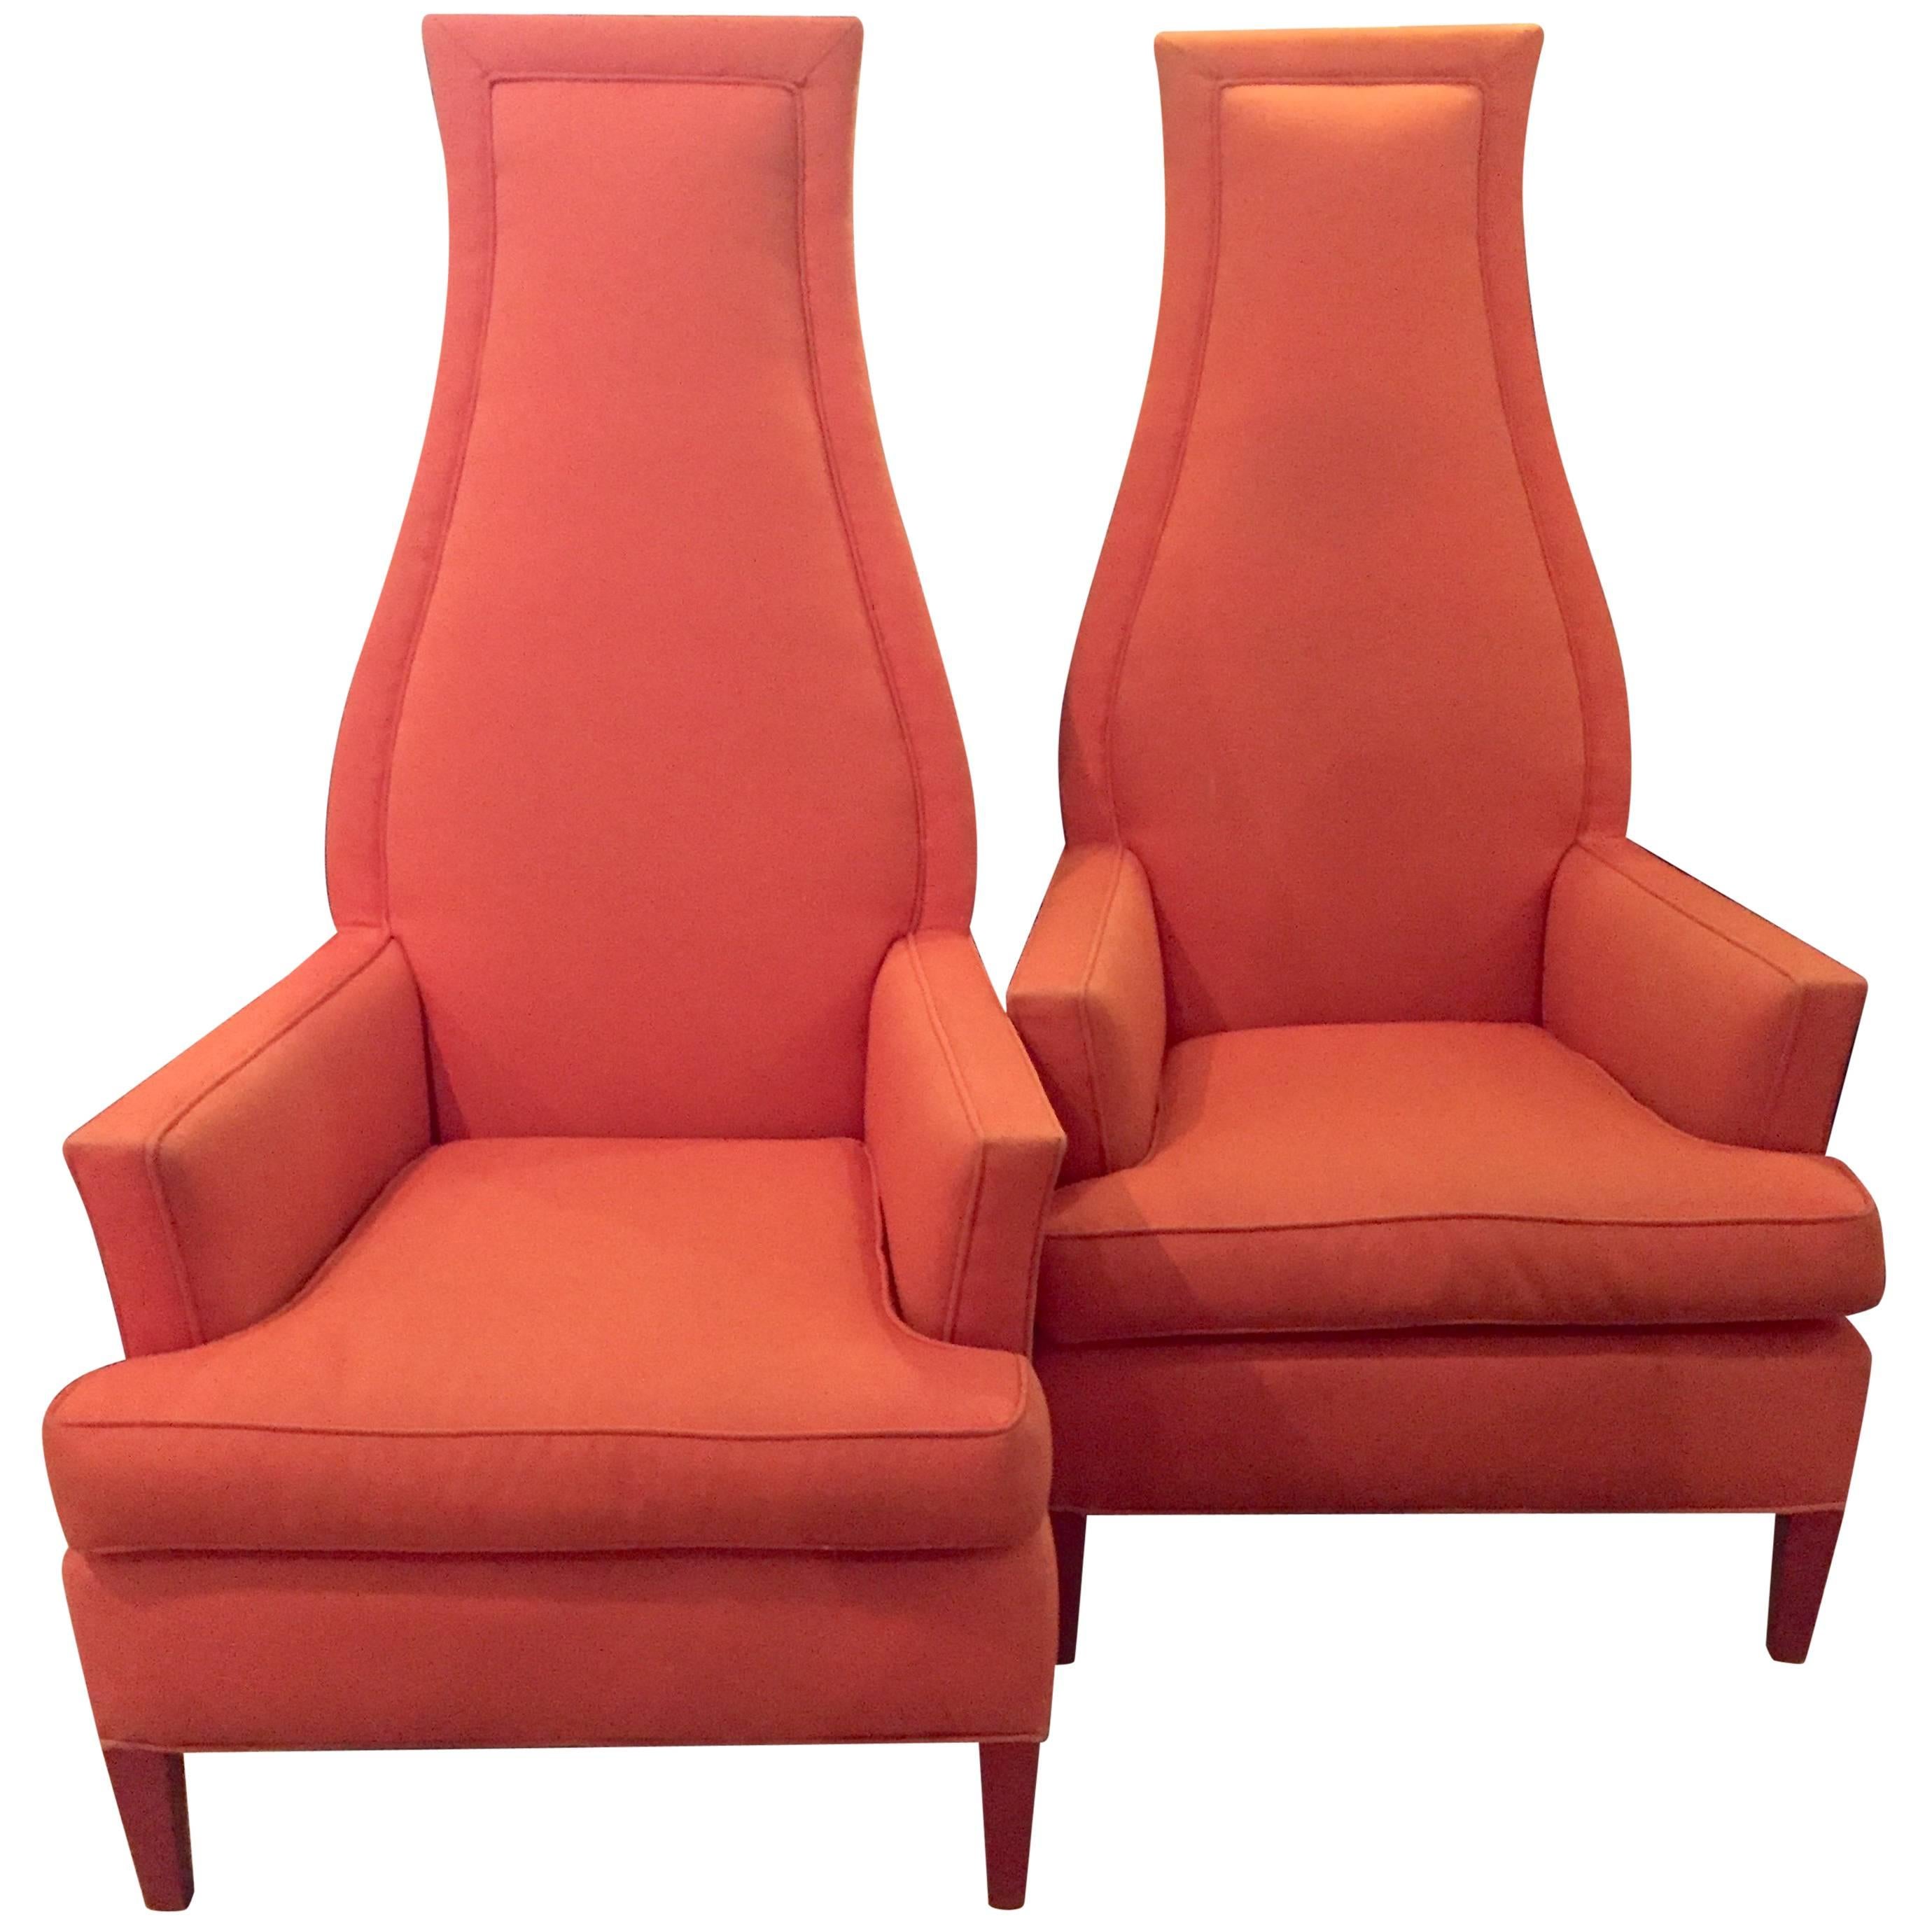 1960s Hollywood Regency Upholstered Chairs